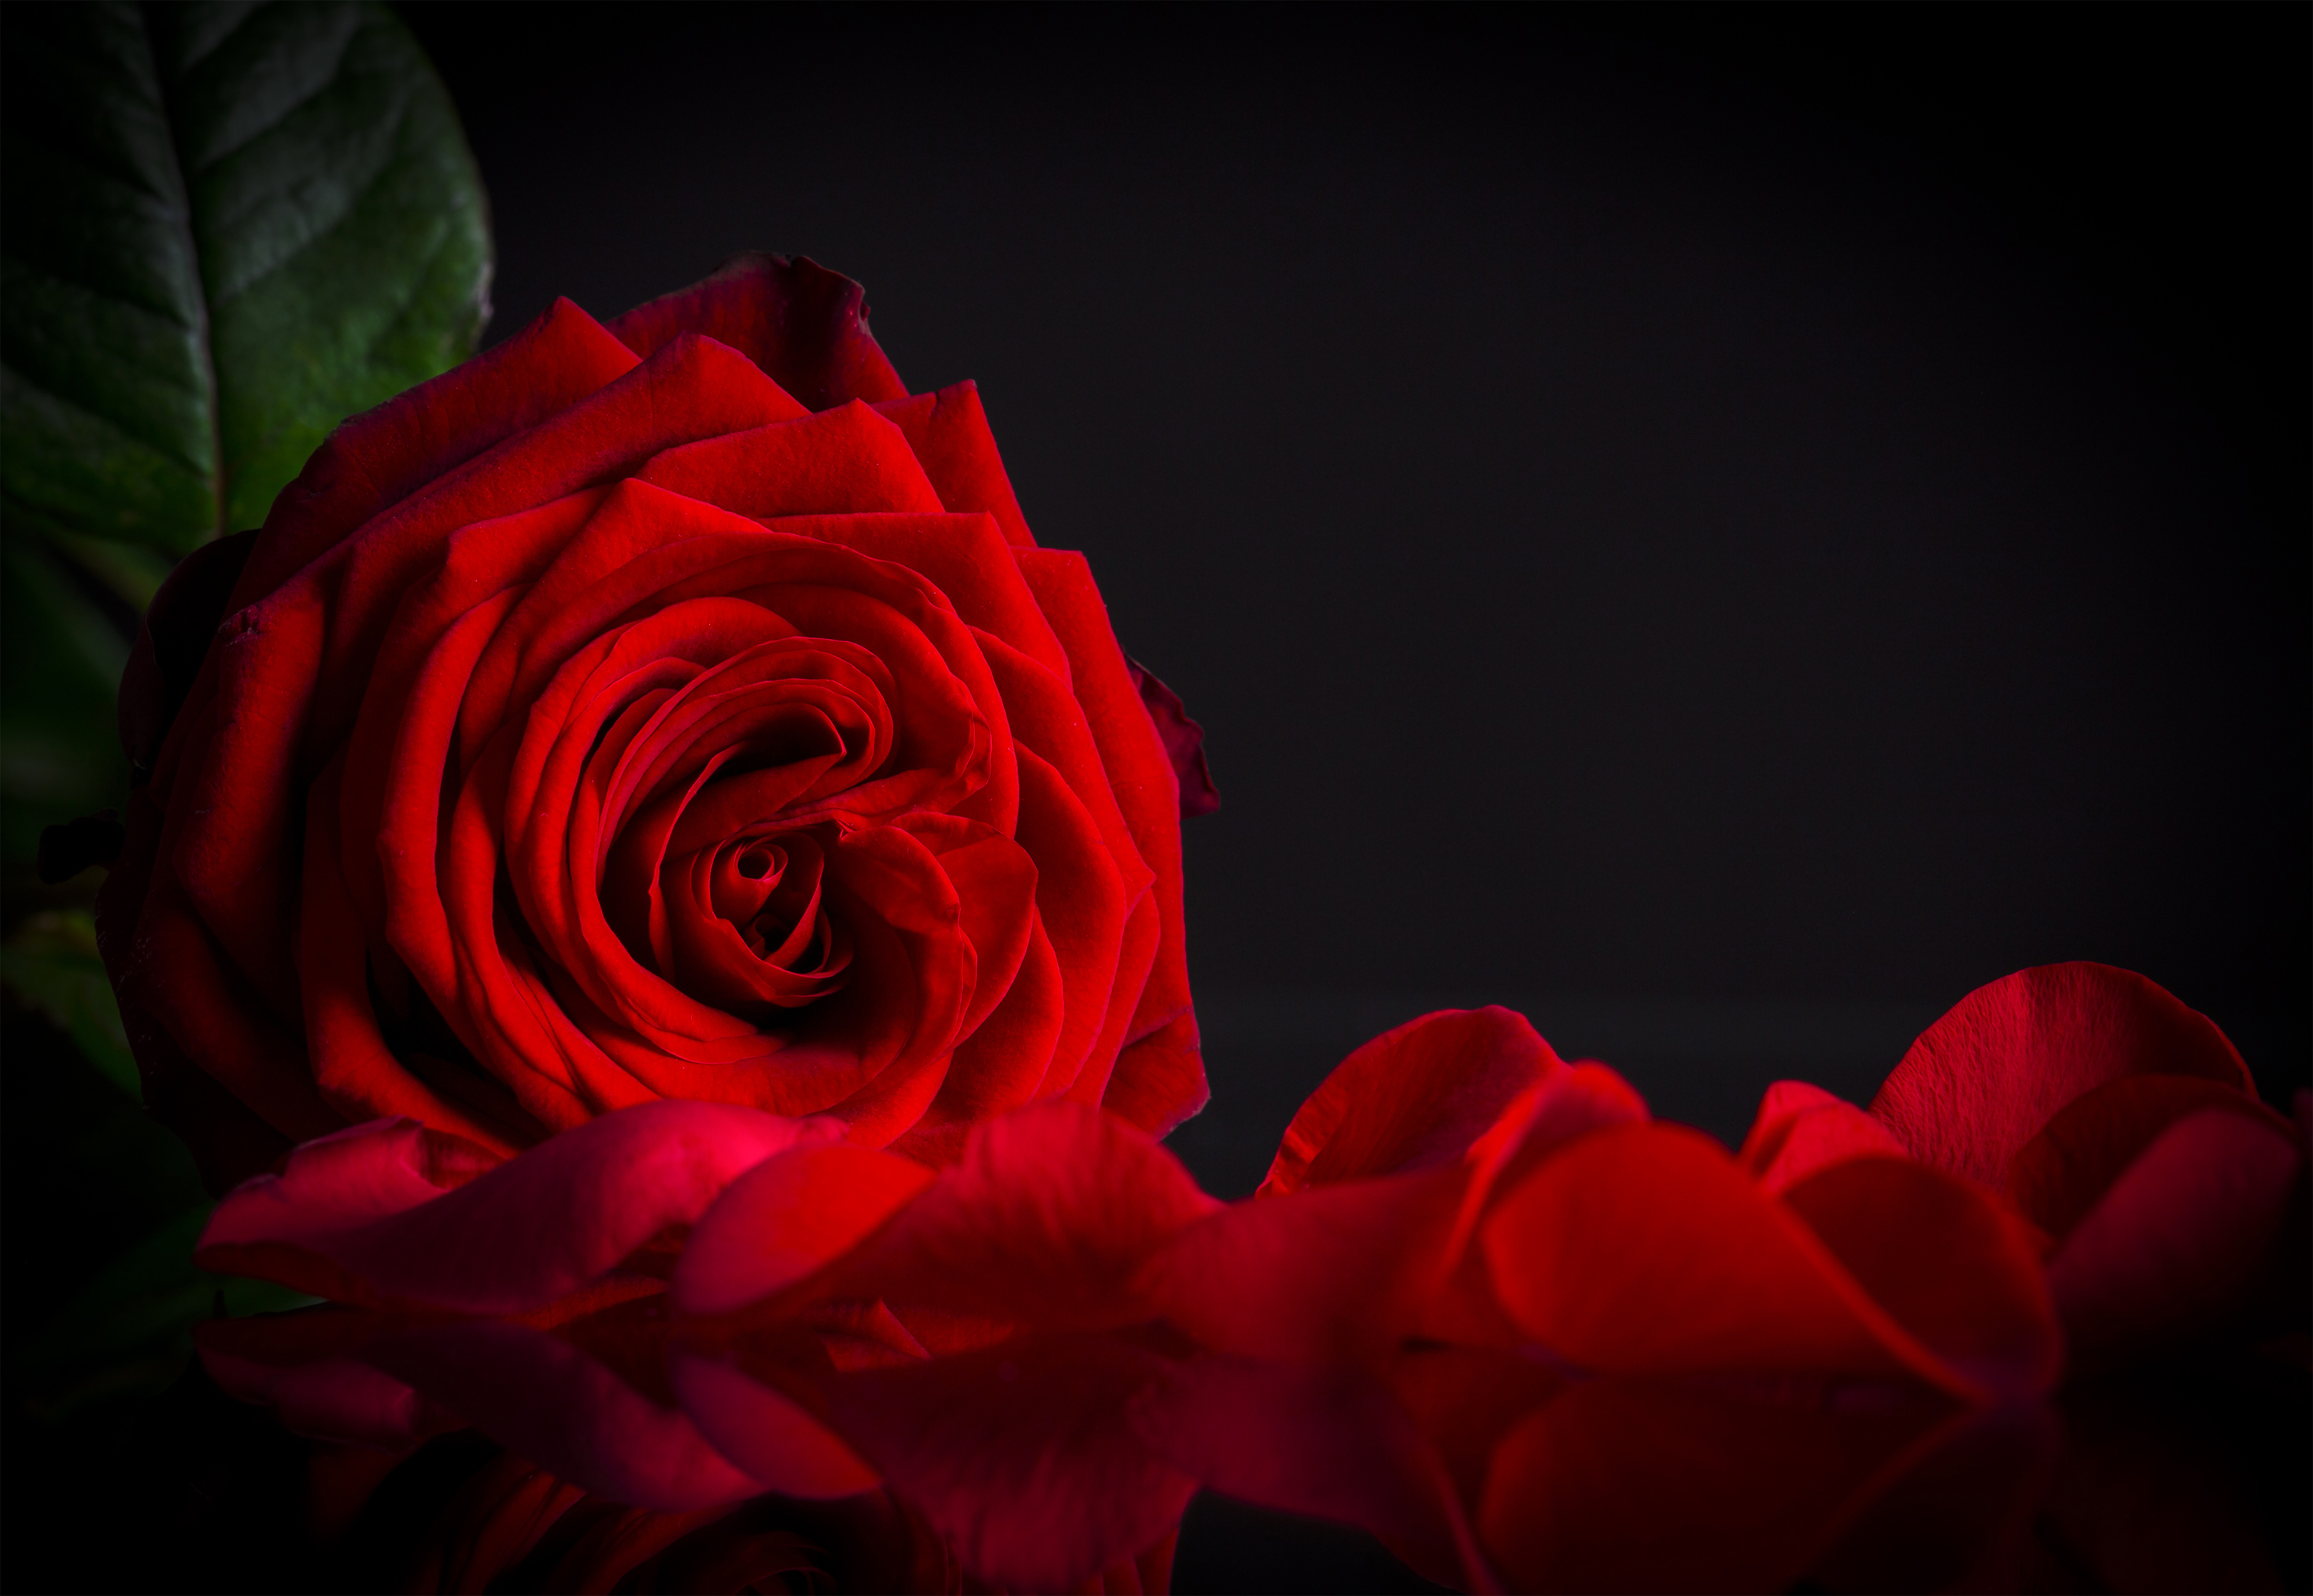 Black And Red Rose Images